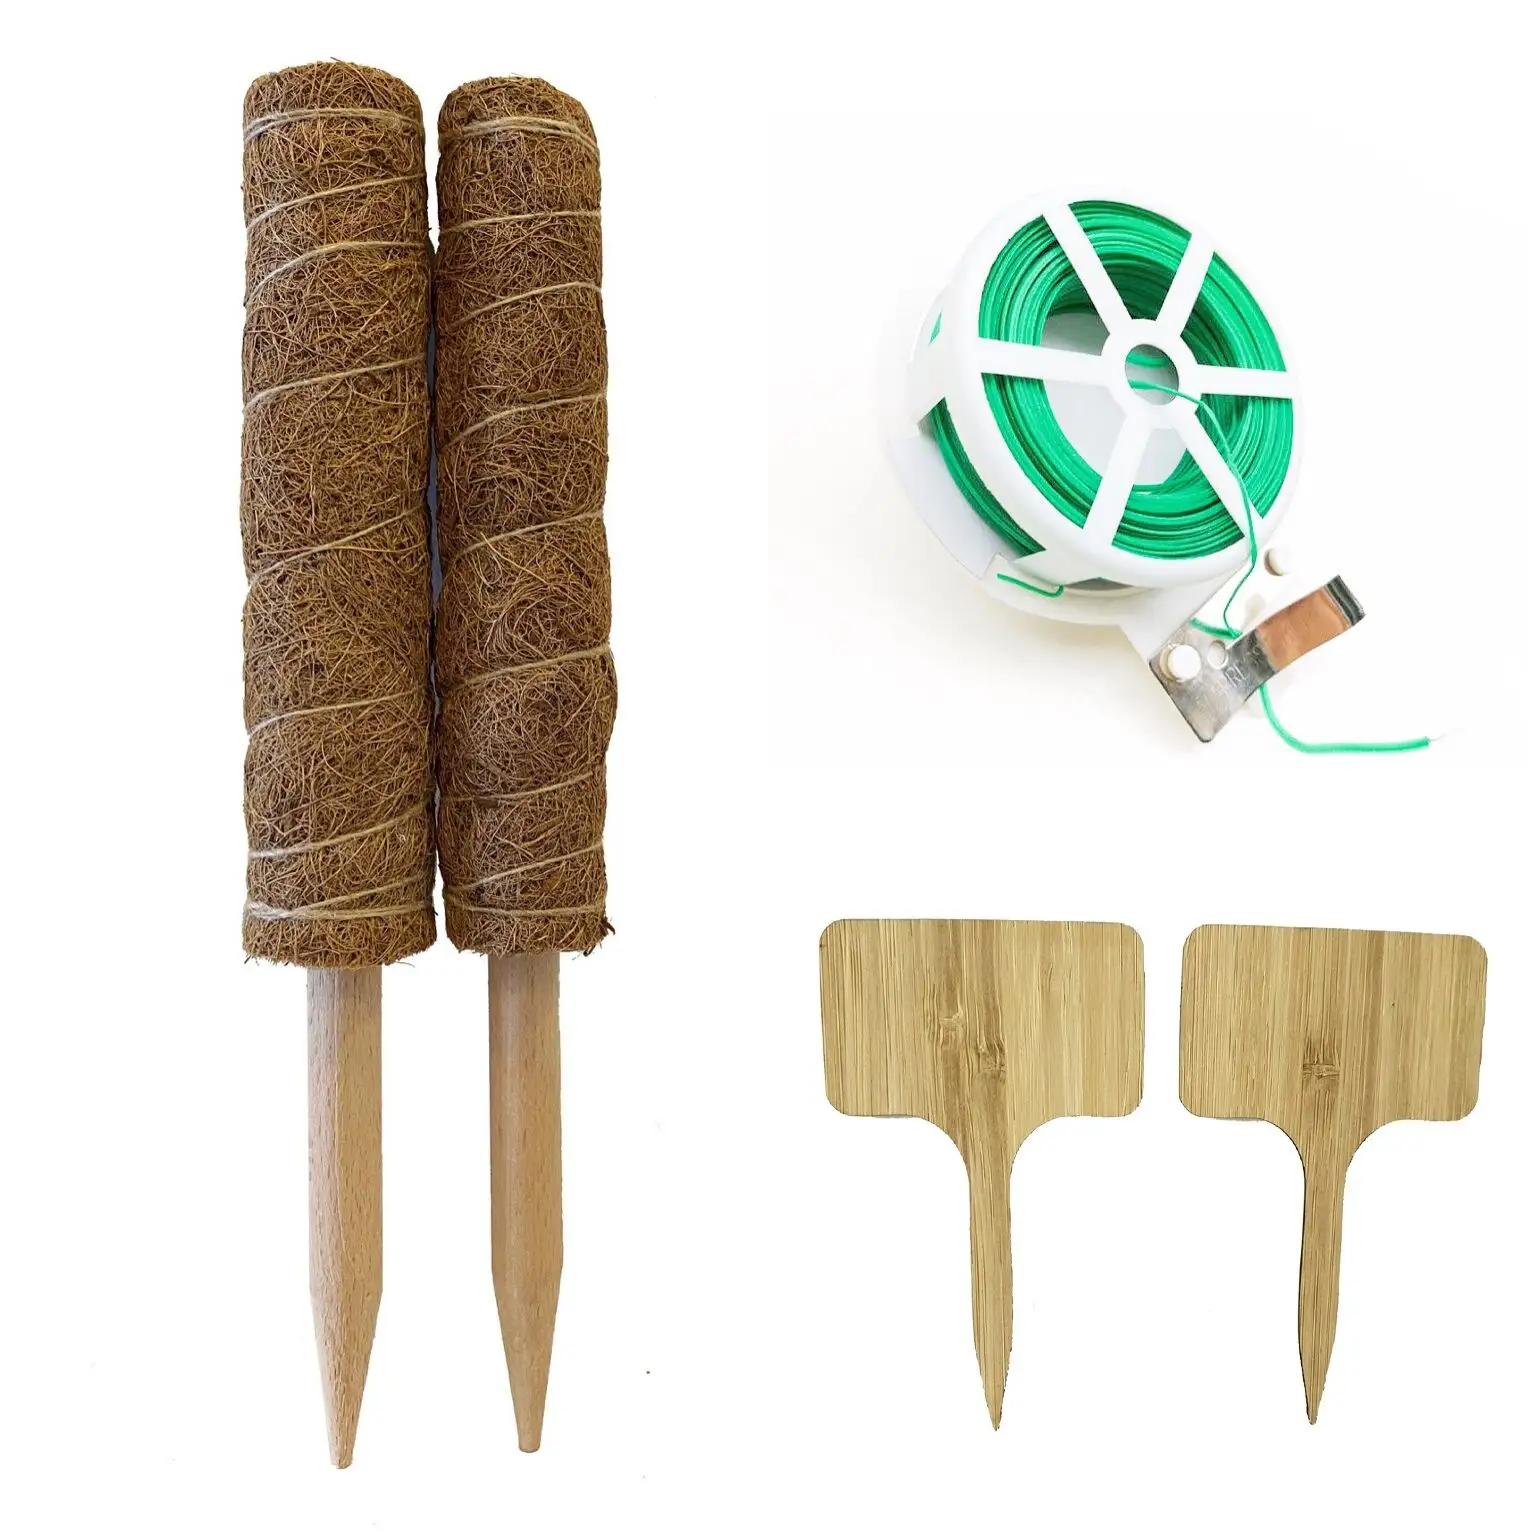 12 inches Biodegradable coco plants poles with variety moss pole accessories like totem pole support